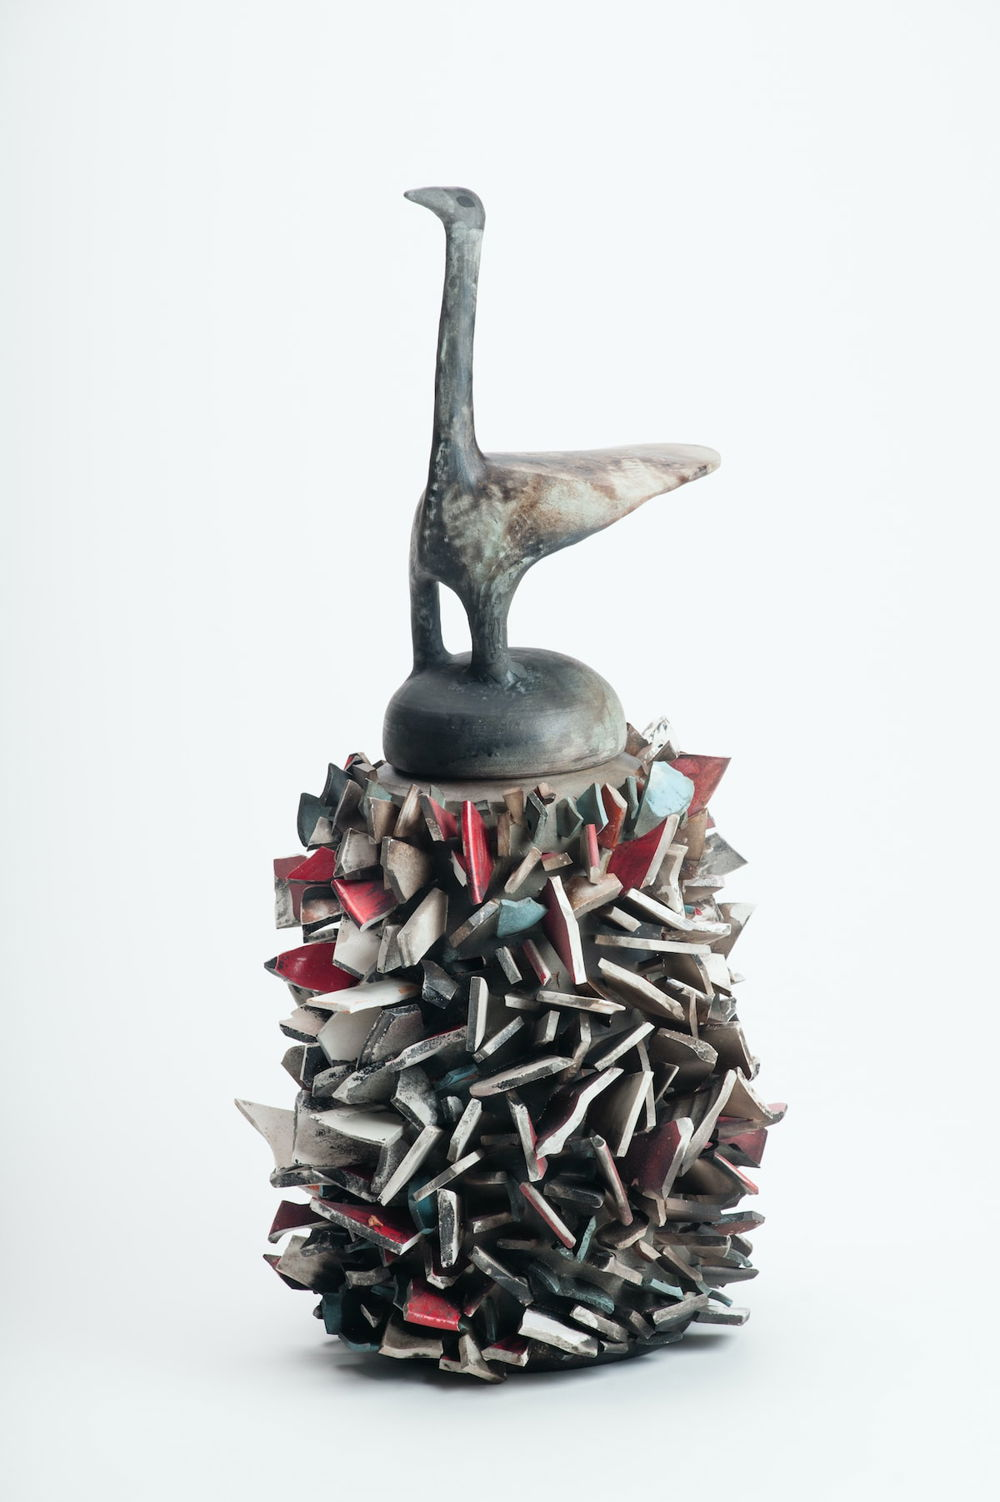 An abstract grey stone sculpture resembling a bird with a beaked head, long neck, oblong triangular body, and two-cylinder shaped legs. The sculpture stands on a circular pedestal that is covered in jagged ceramic shards.